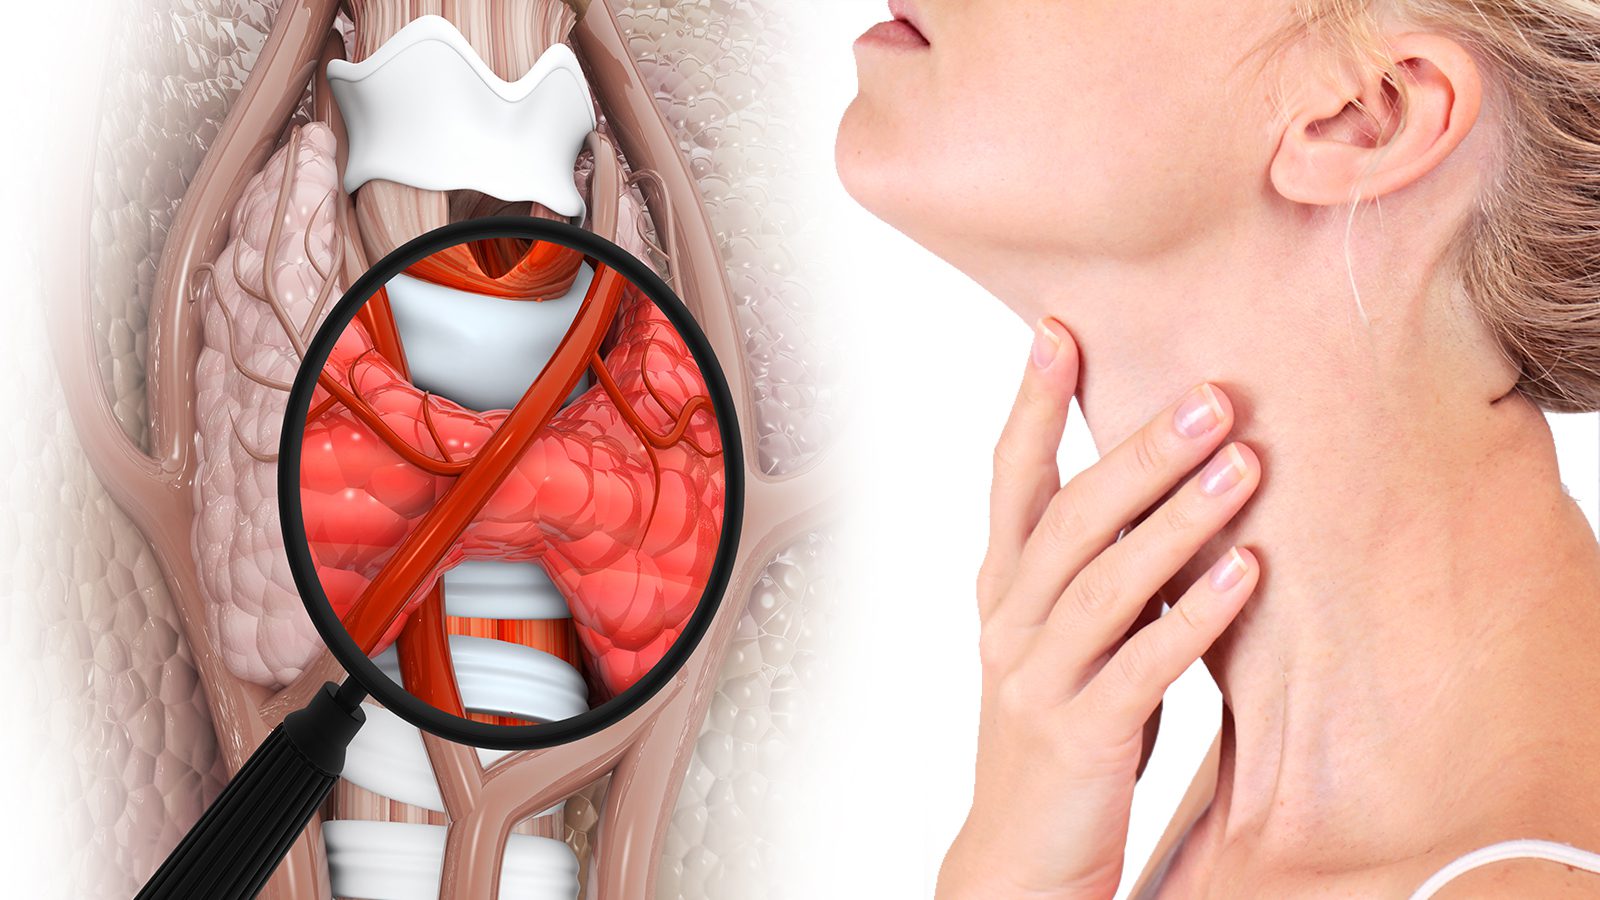 Cleveland Clinic Explains the 3 Types of Thyroid Disorders (and What Causes Them) [Video]